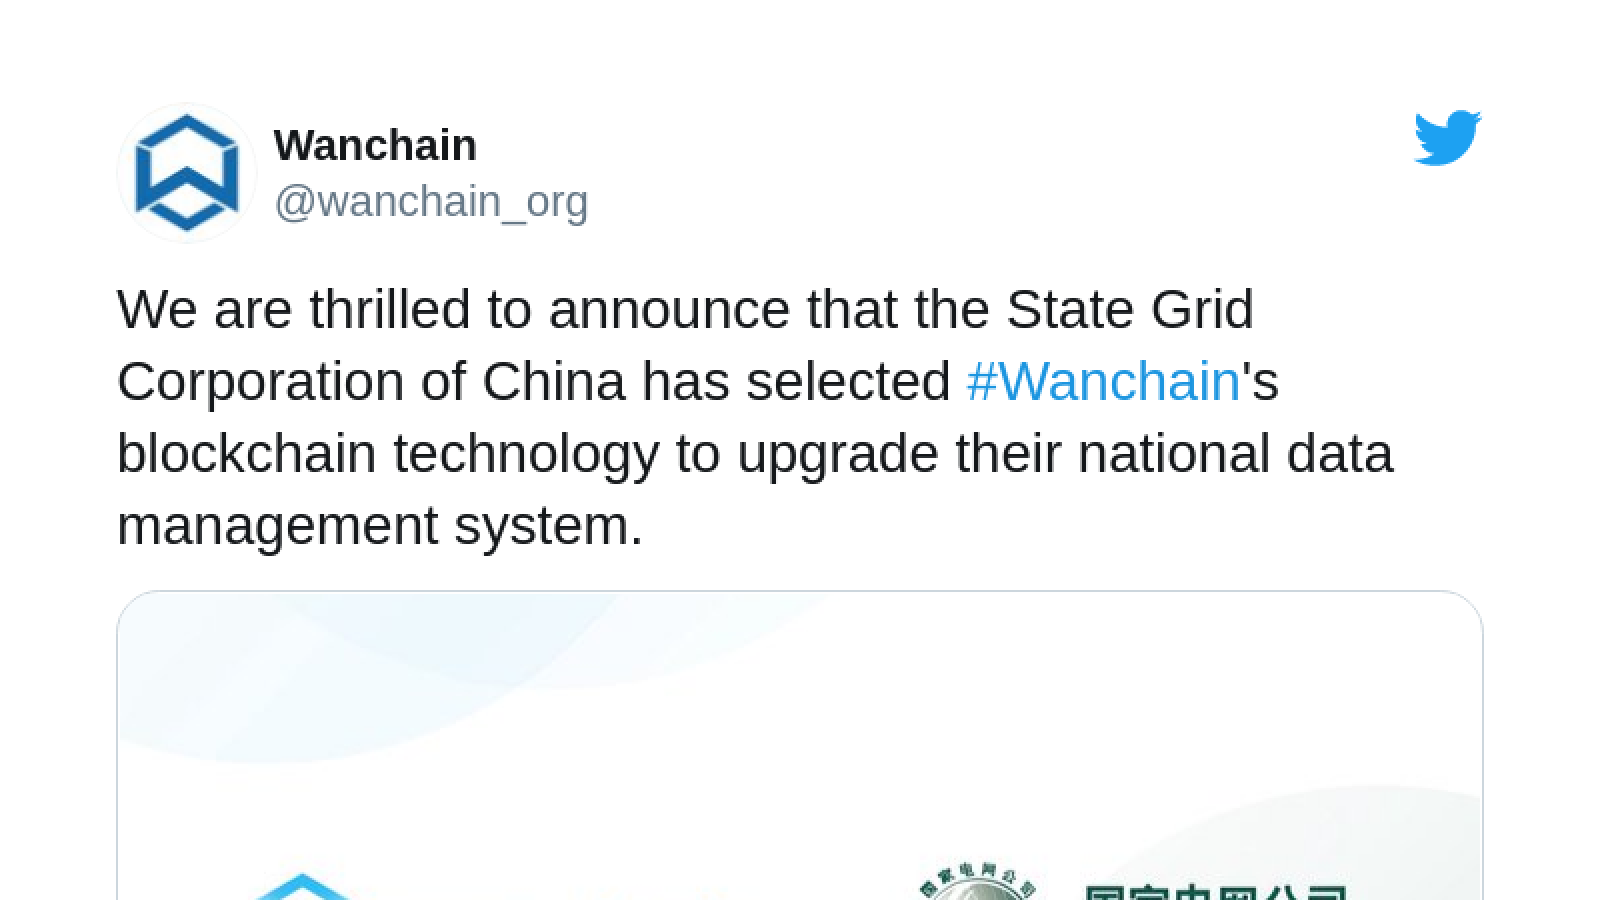 Wanchain (WAN) has partnered with Chinese 'State Grid' corporation